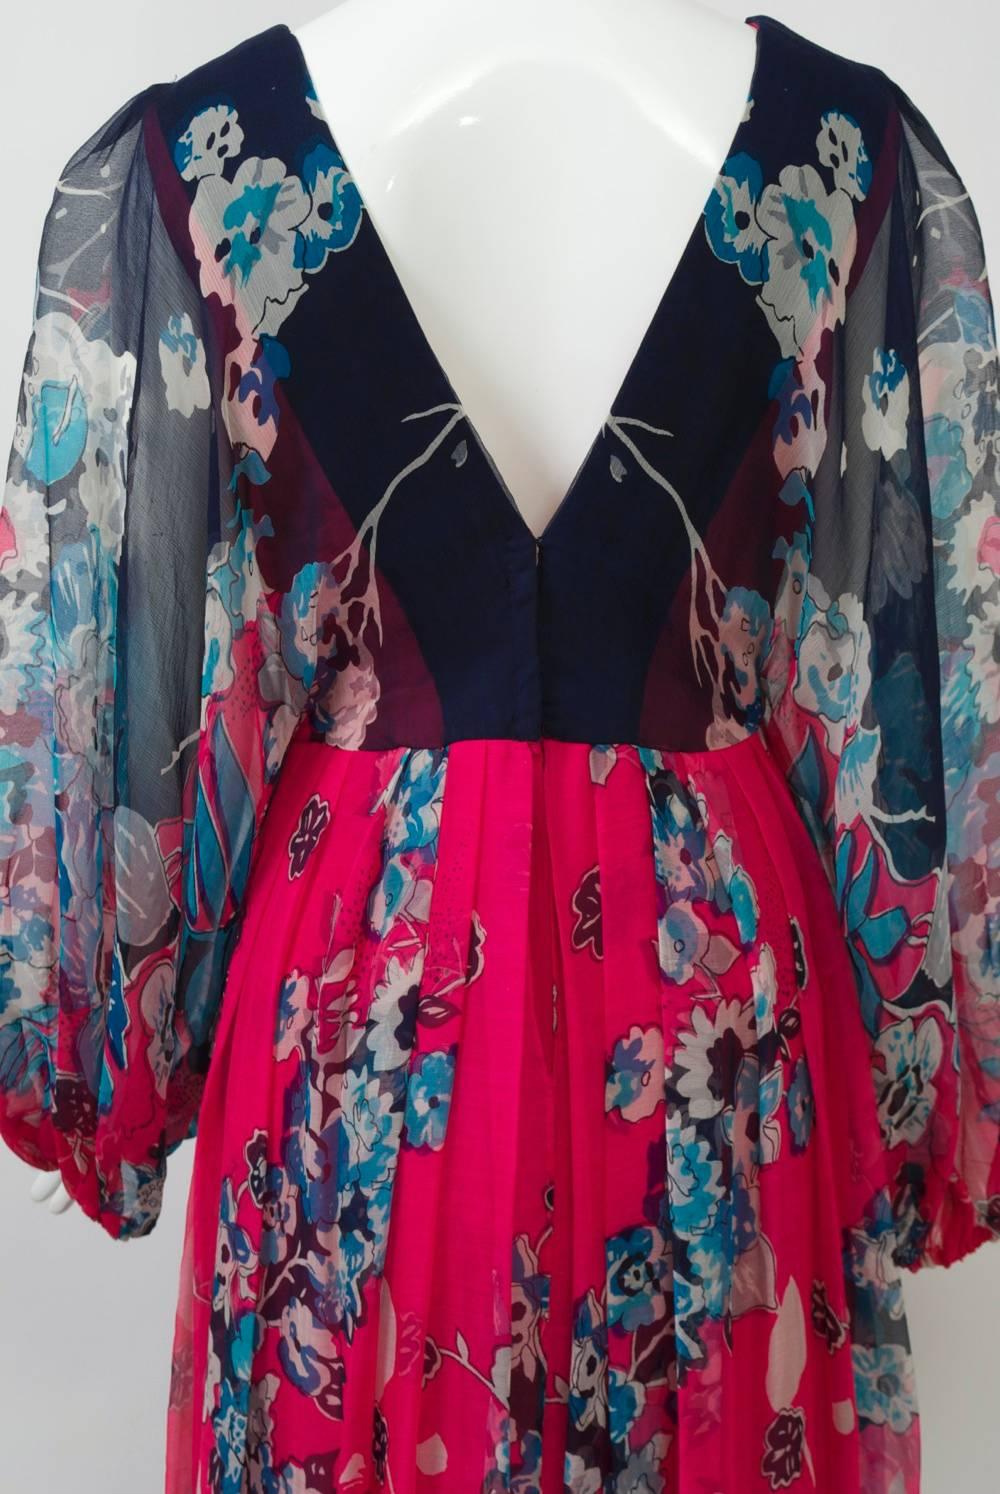 Flowing chiffon floral gown in fuchsia and navy print featuring a deep V neckline front and back, a high waistline, and sheer, raglan balloon sleeves. The skirt falls from soft pleats and has a fuchsia lining. A matching scarf can be worn around the